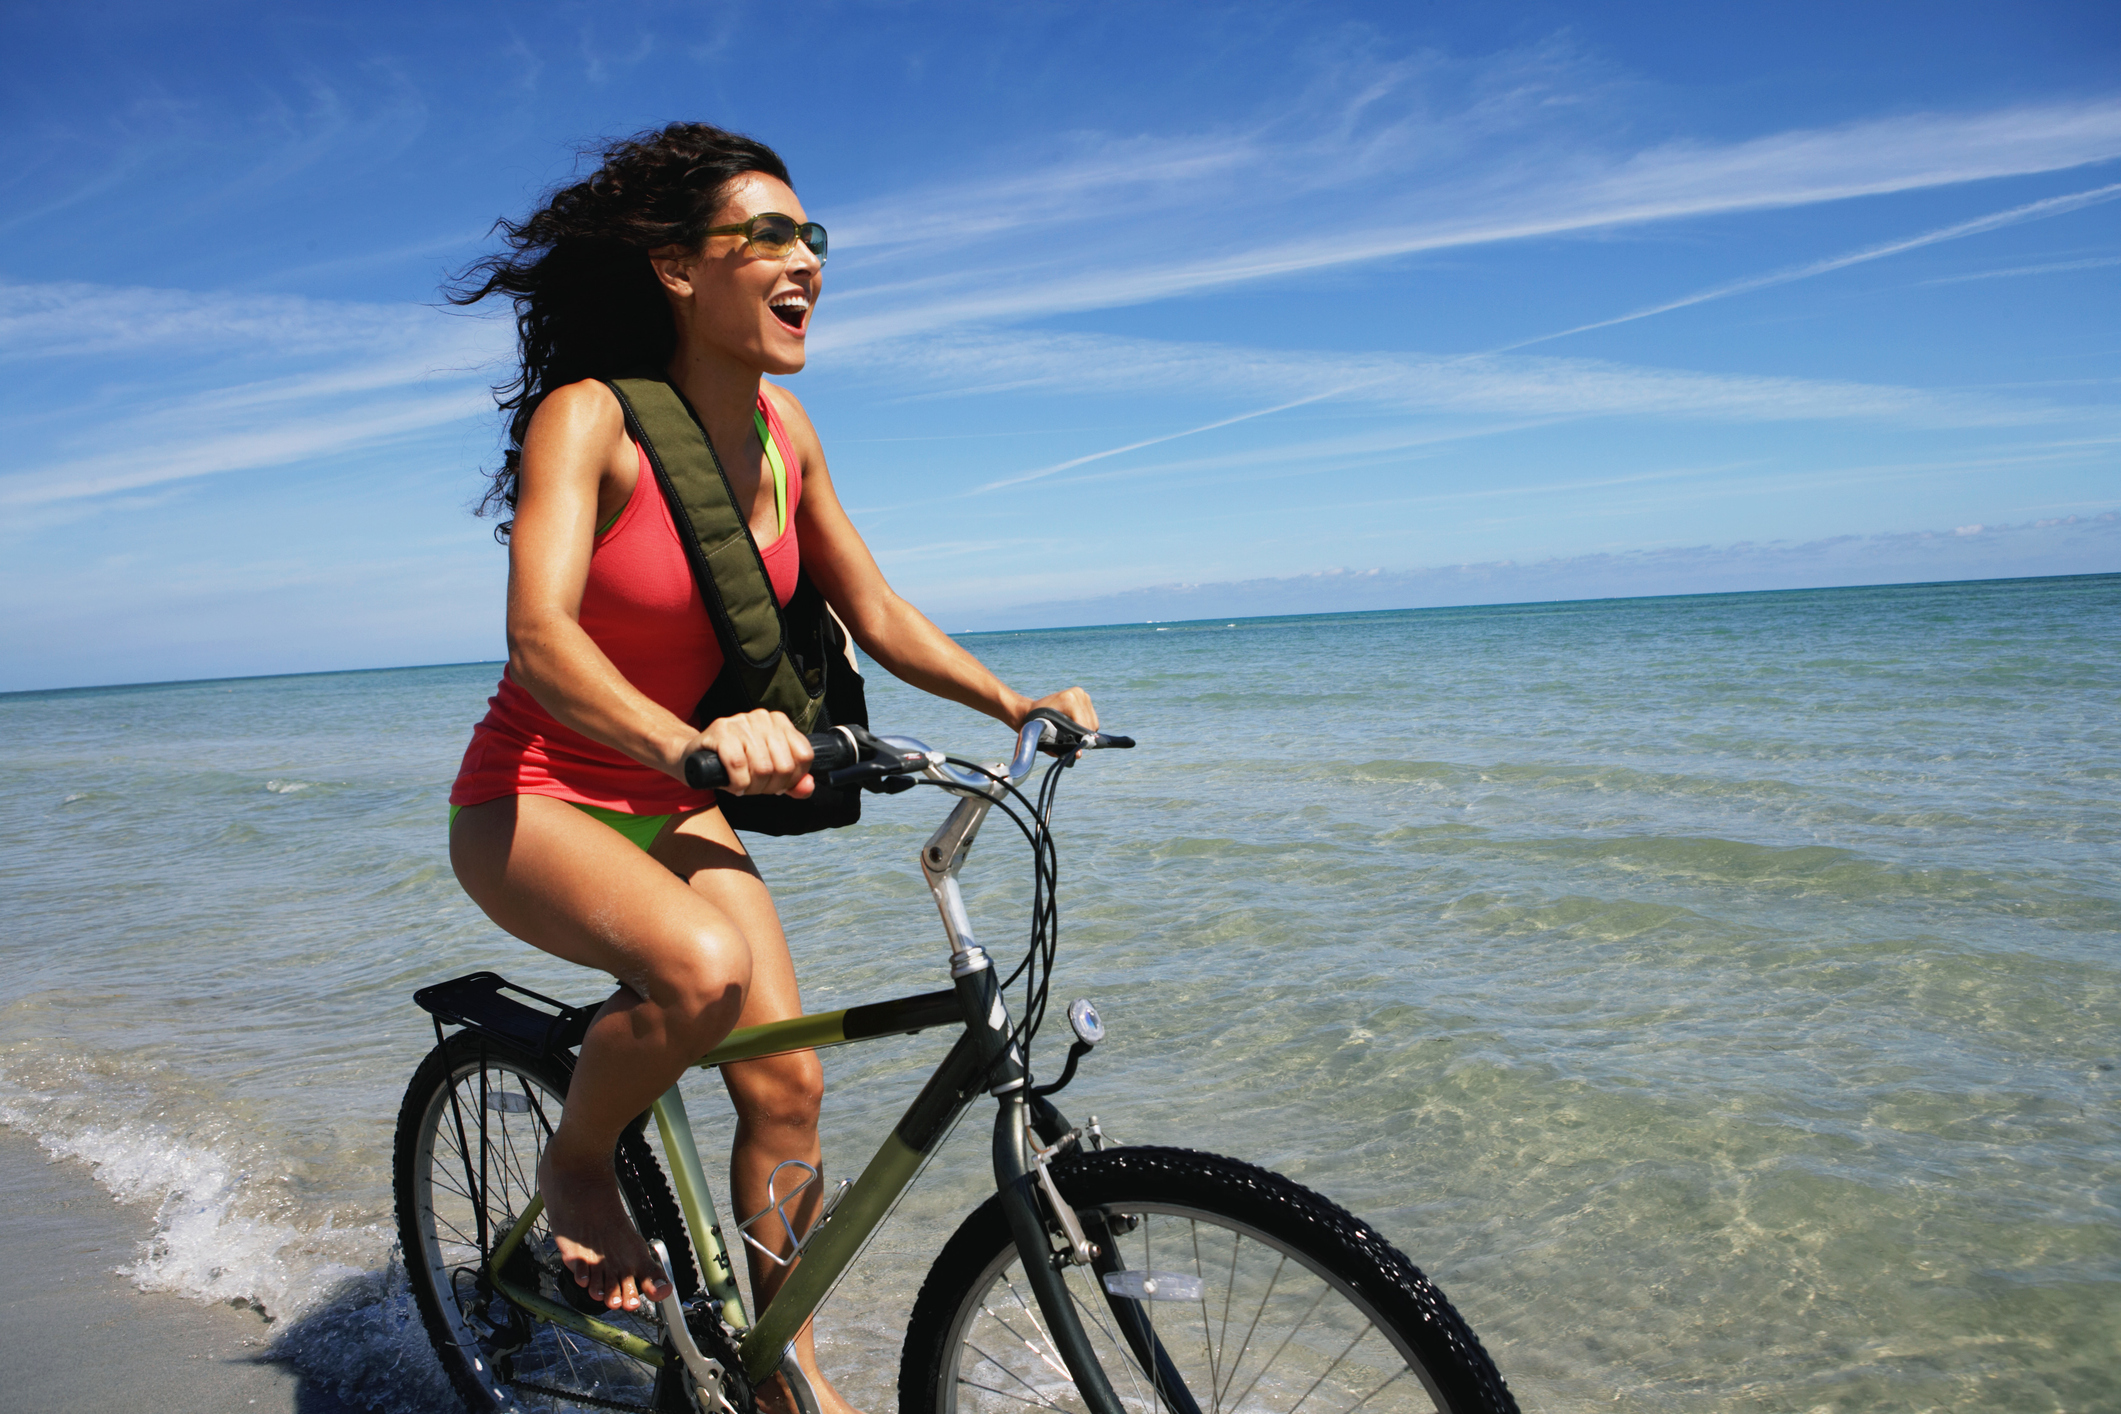 Young woman riding bicycle on beach, smiling, side view